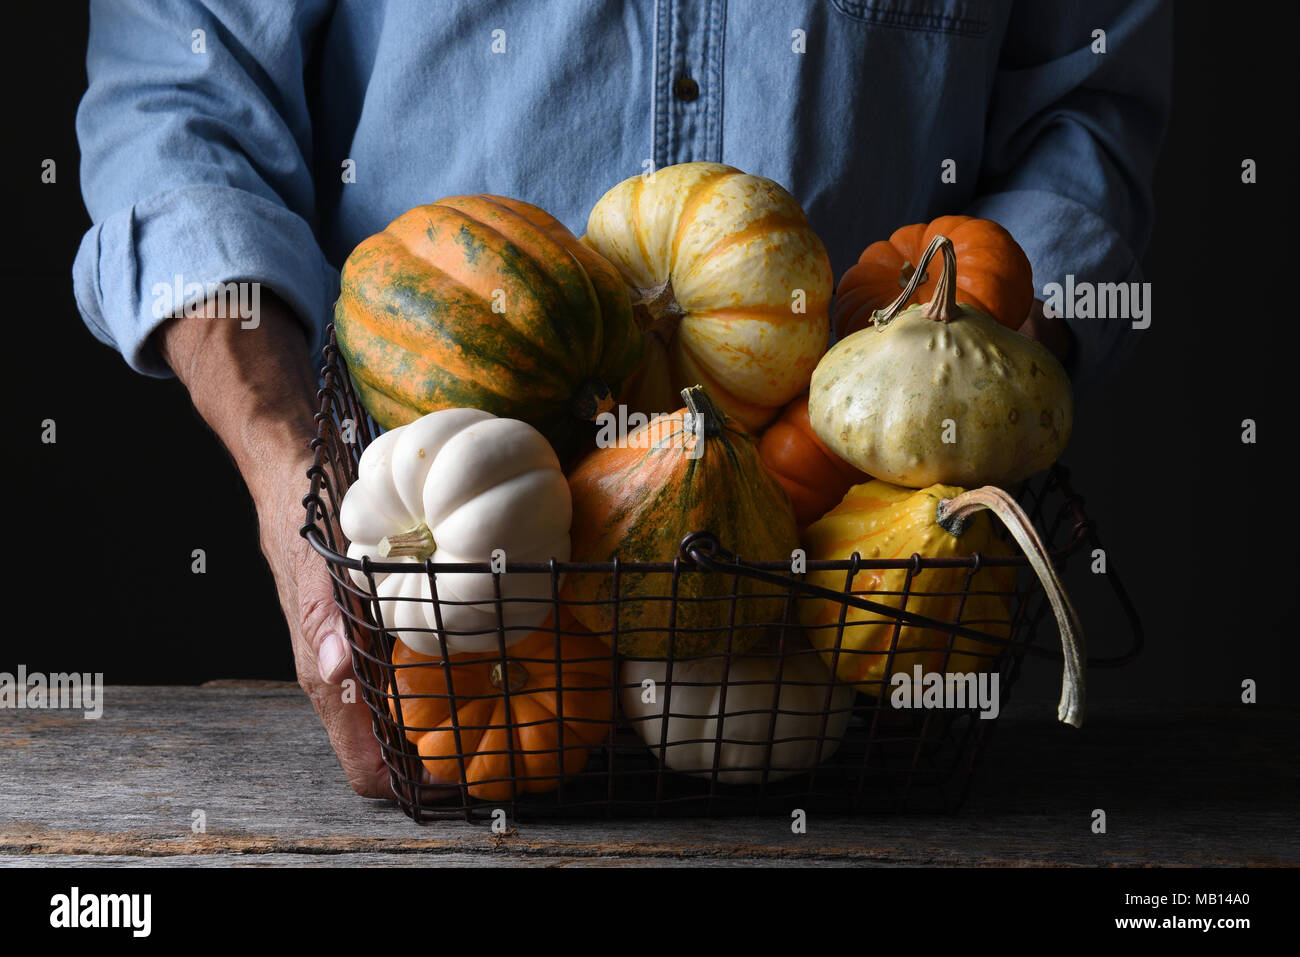 Farmer at his stand holding a wire basket of Autumn vegetables and decorative gourds and pumpkins. Stock Photo